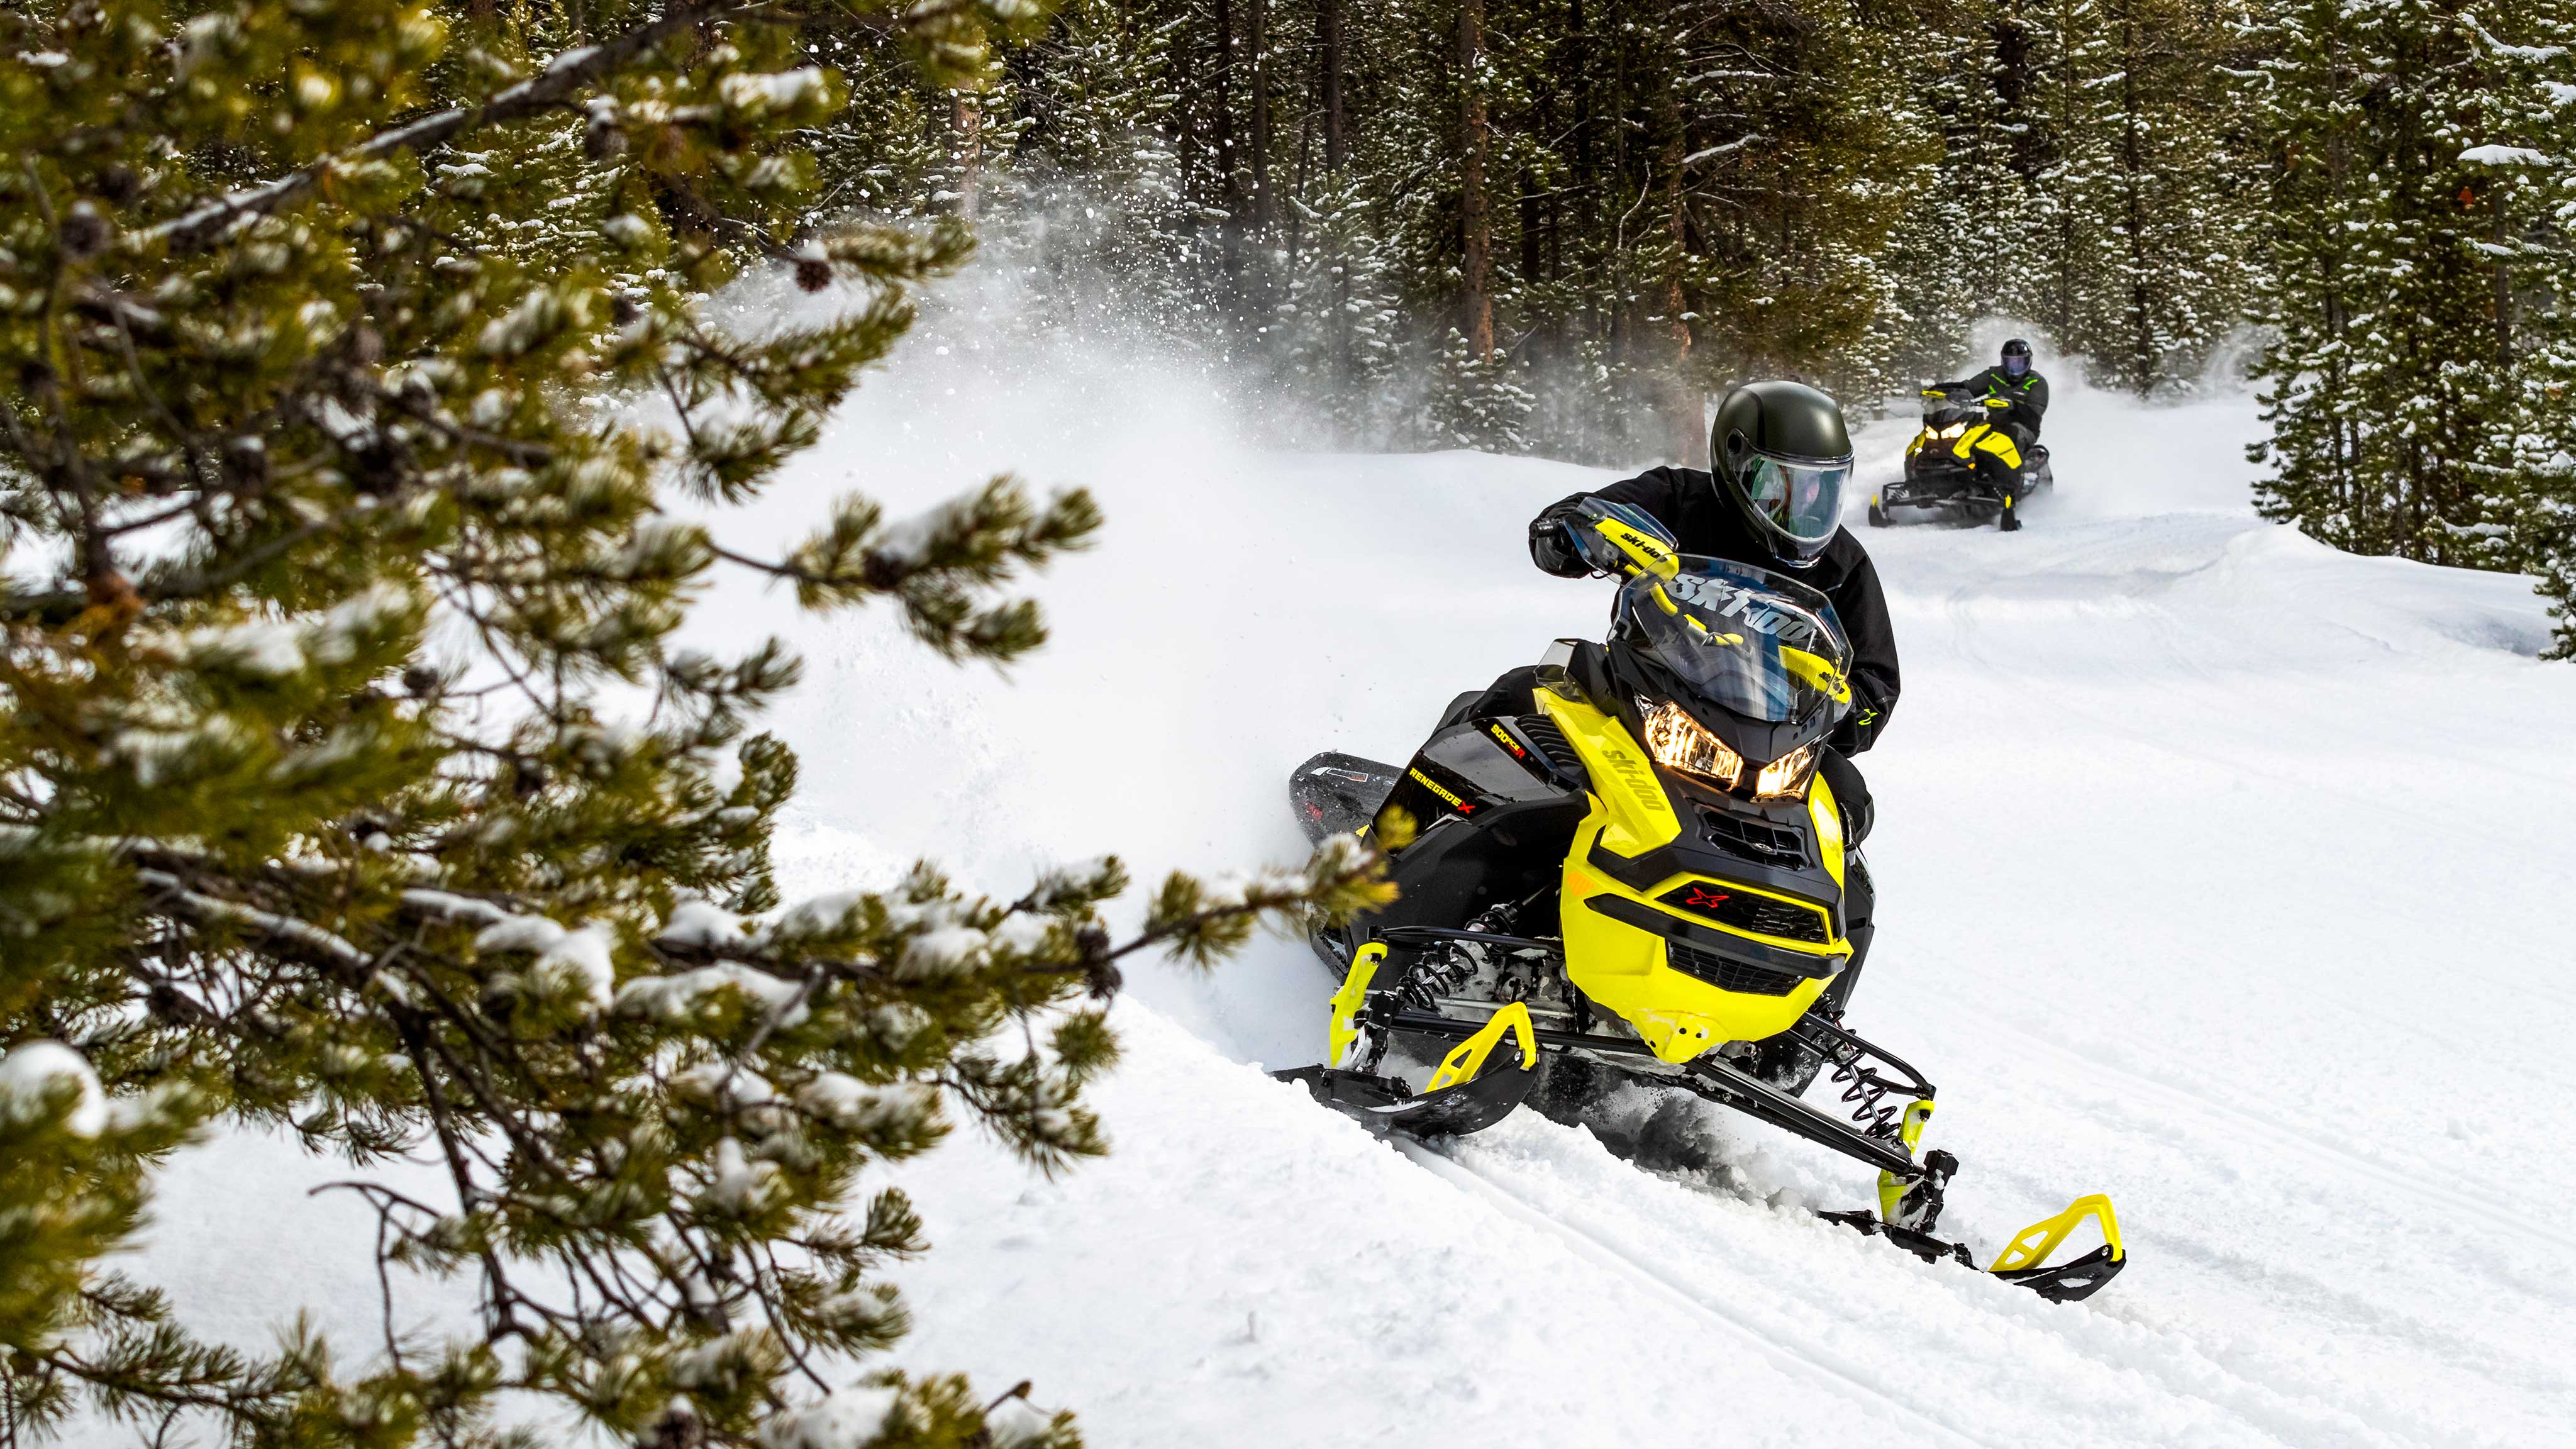 Man riding the new Ski-Doo on a turn in a trail